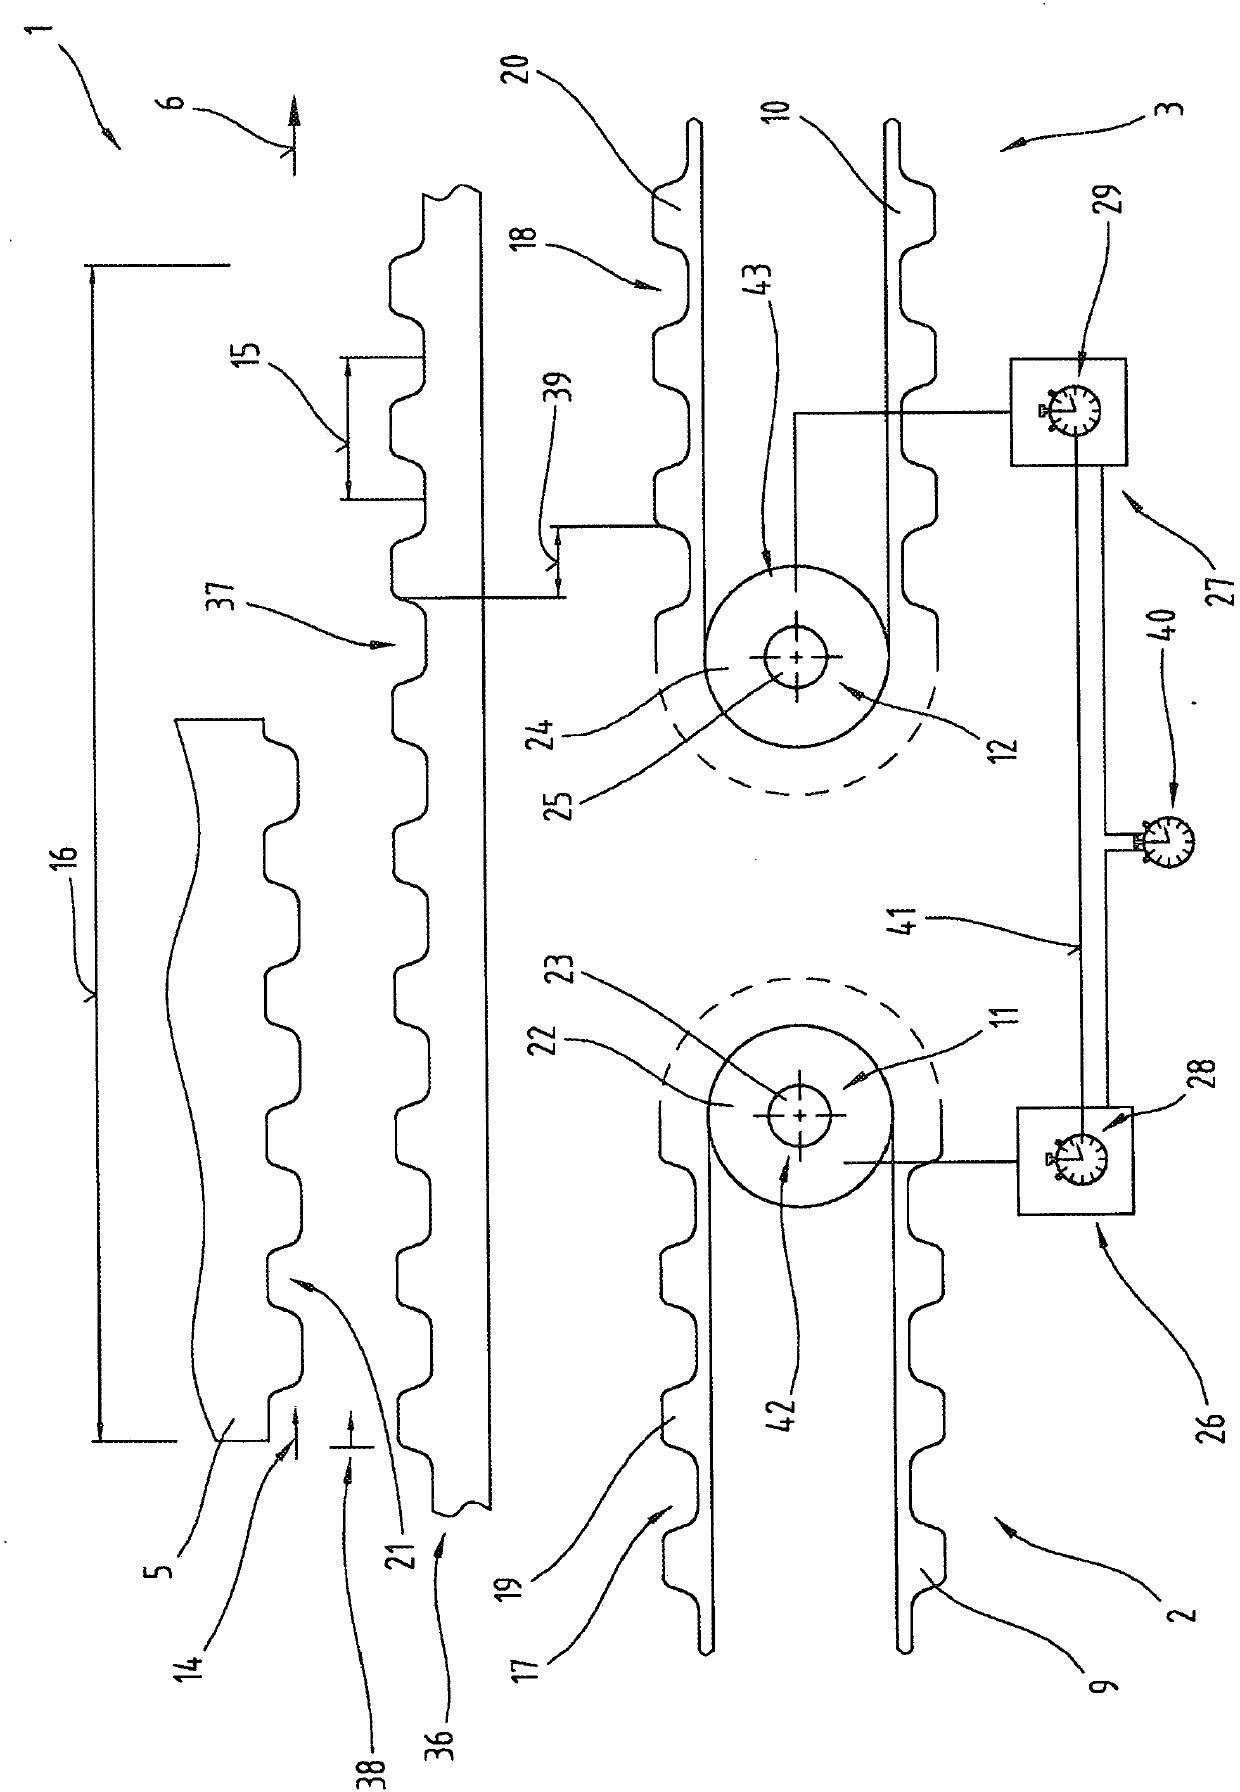 Method for transferring a workpiece carrier between two toothed-belt conveyors